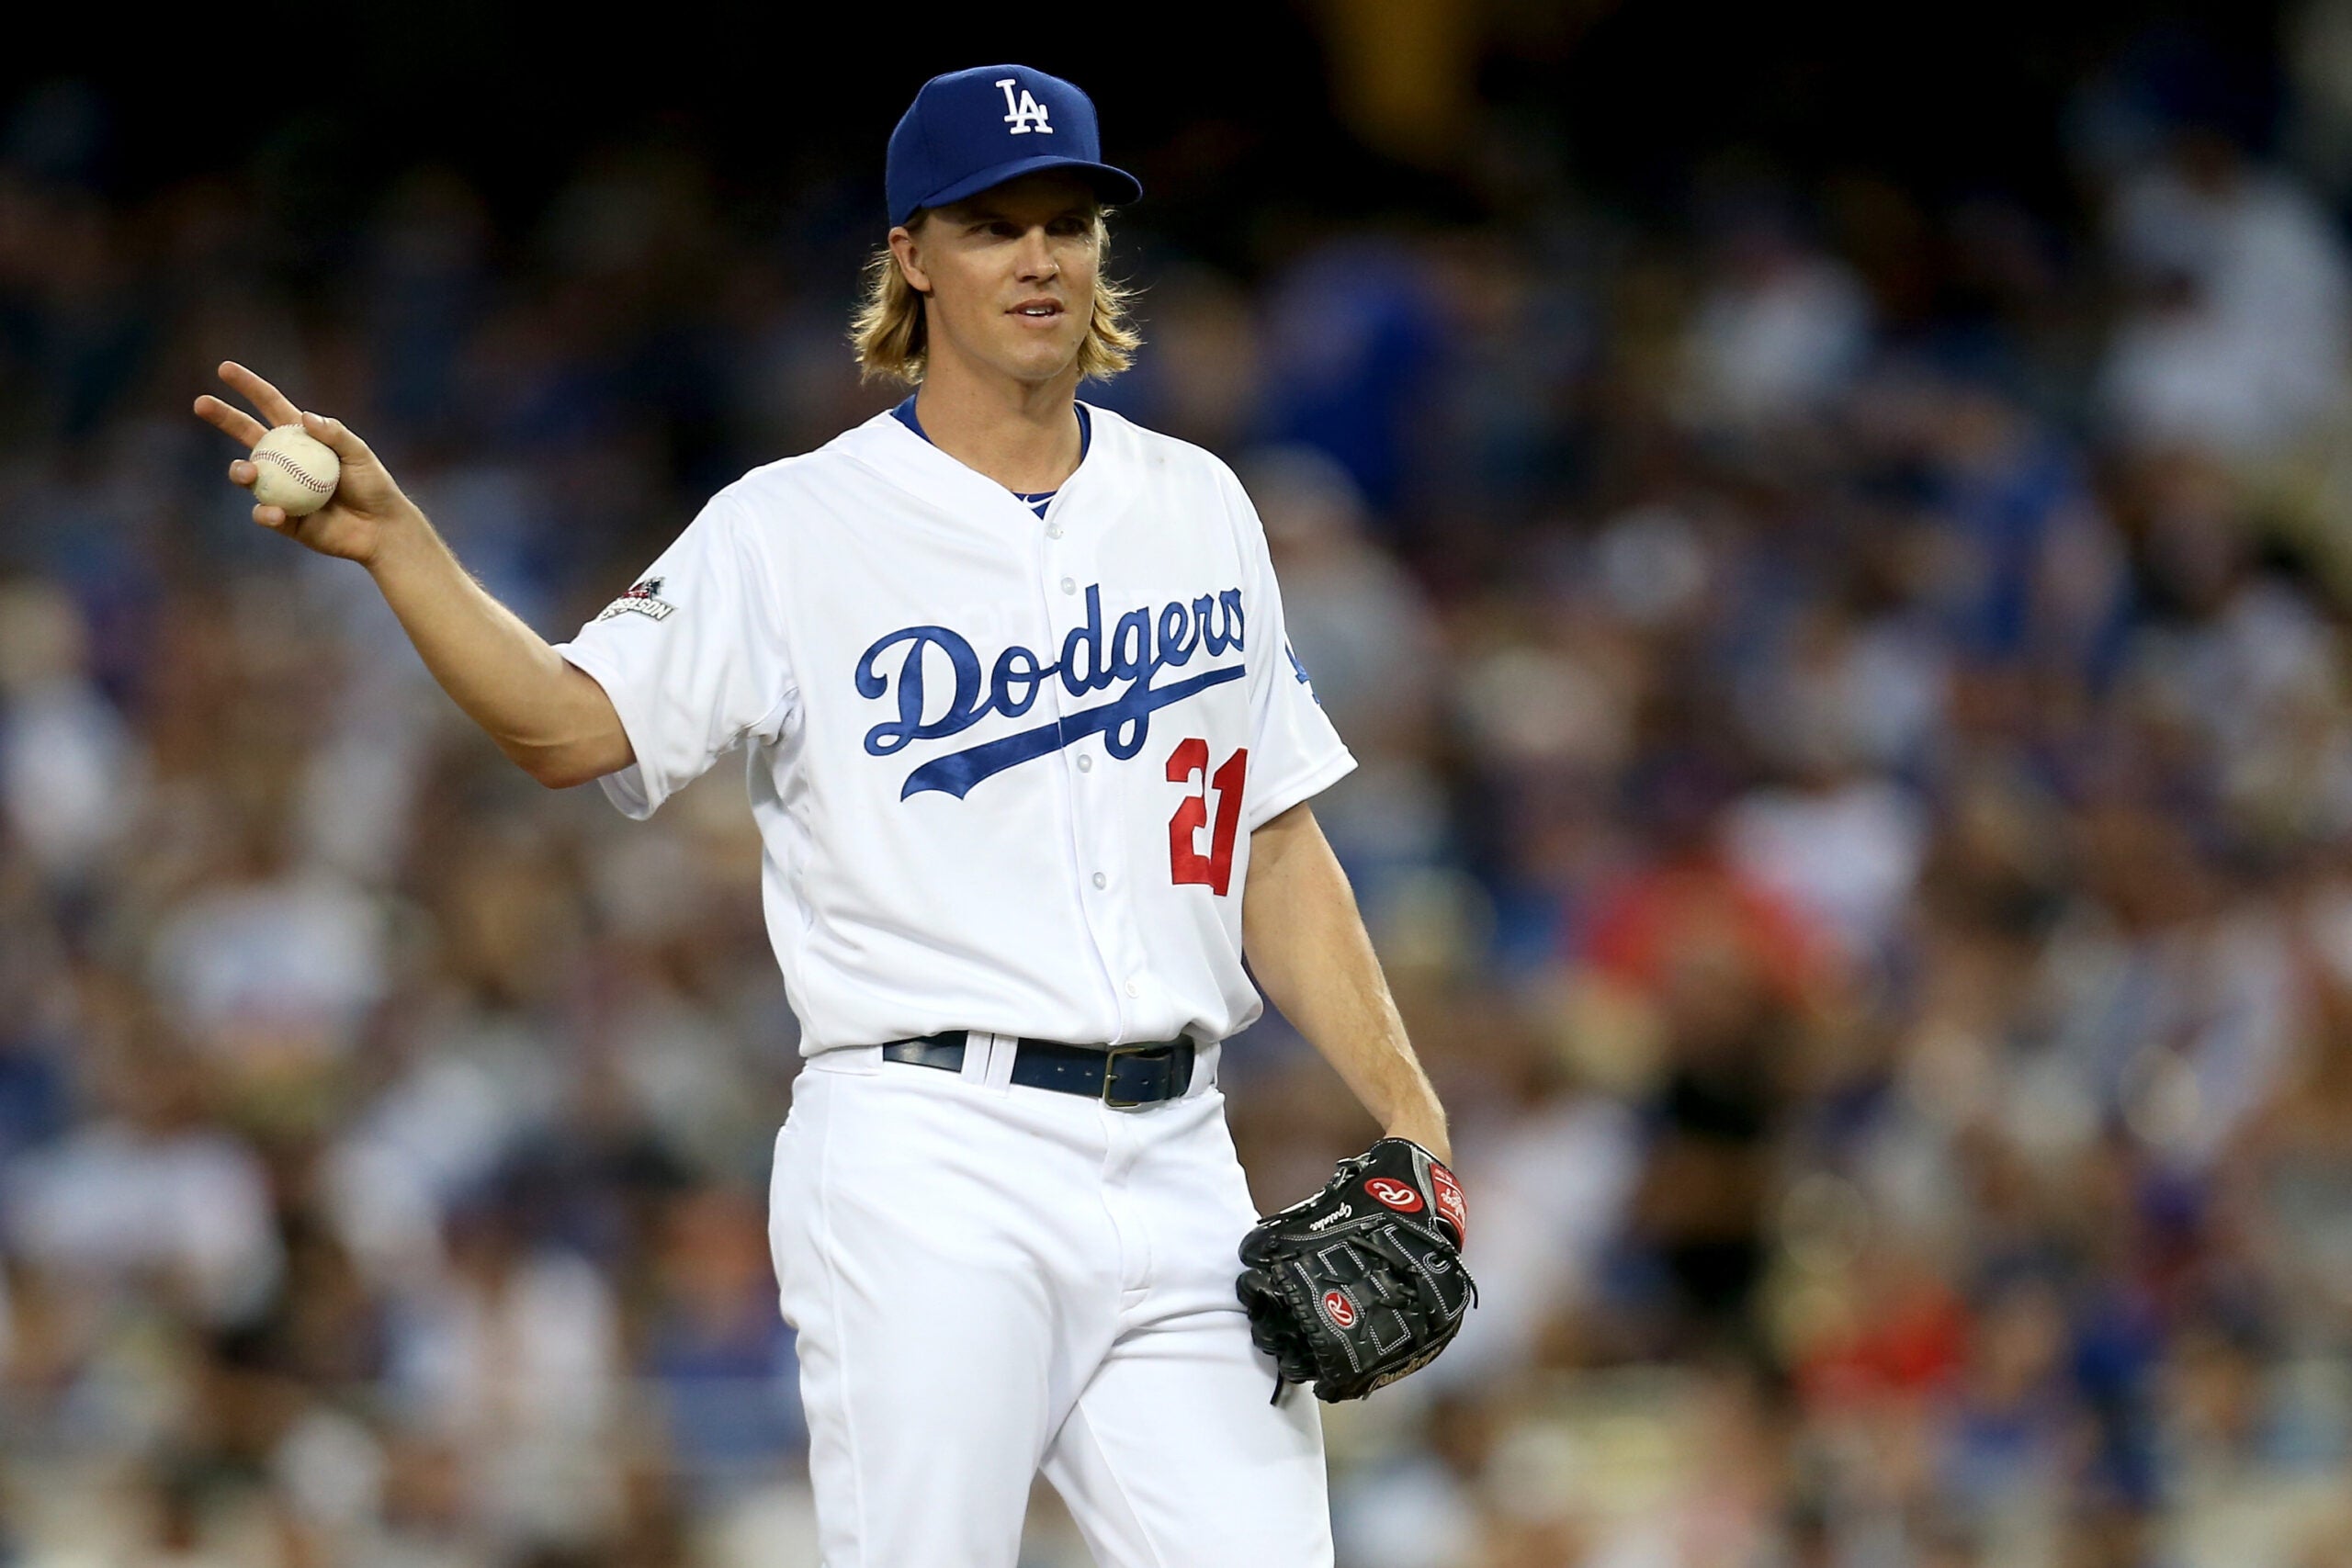 Royals Majestic Team Store to carry Zack Greinke Cy Young merchandise, by  MLB.com/blogs